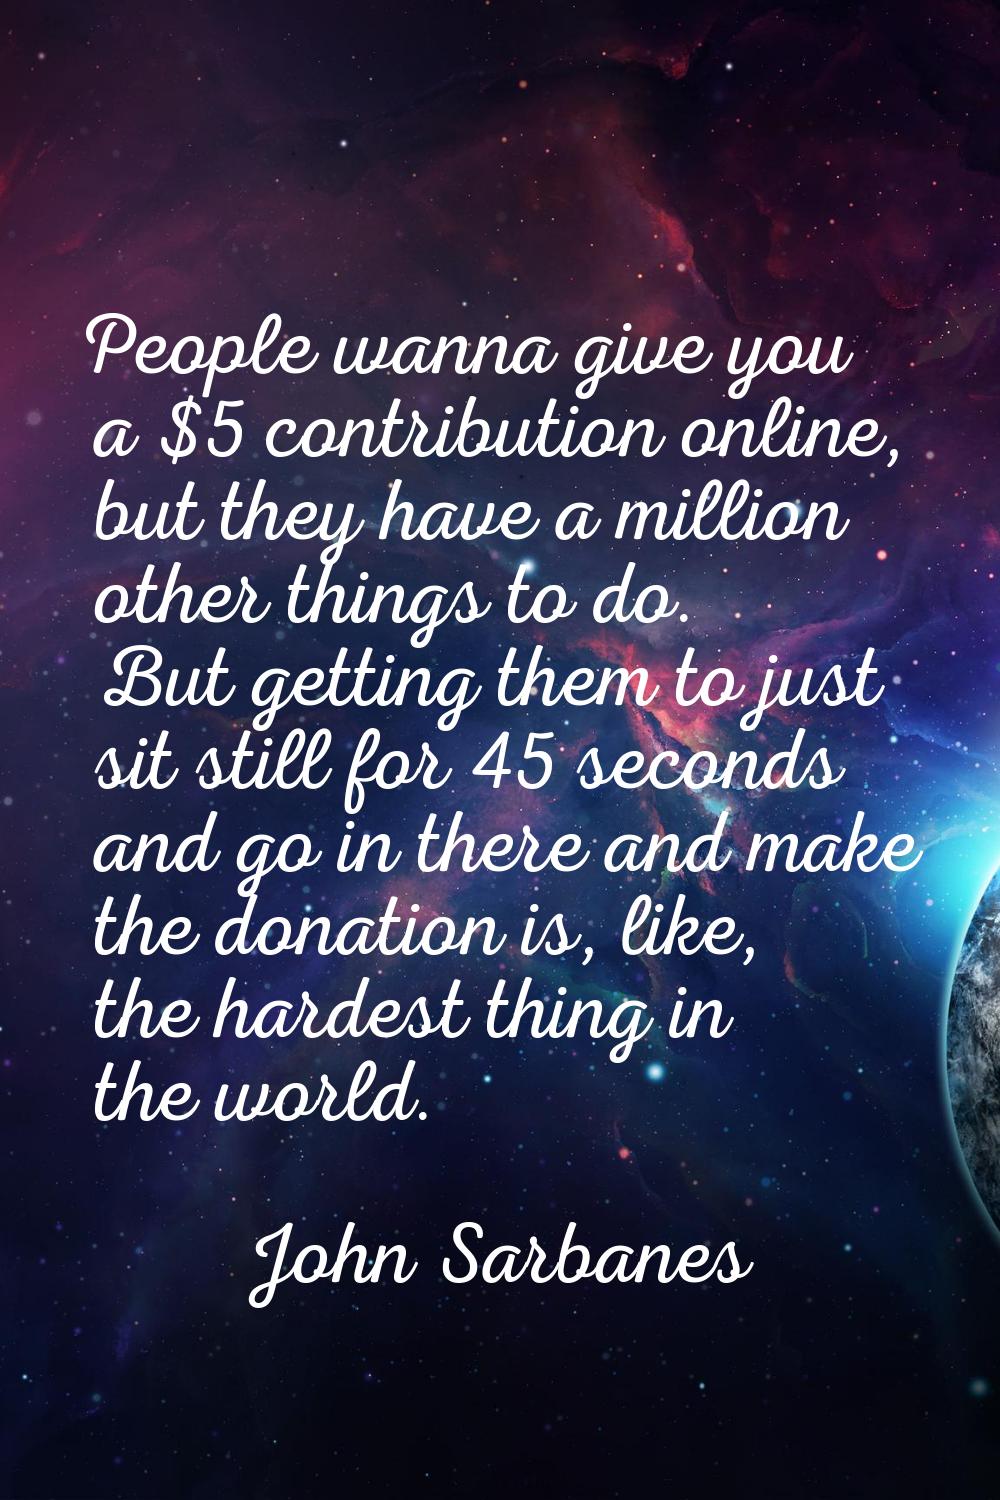 People wanna give you a $5 contribution online, but they have a million other things to do. But get